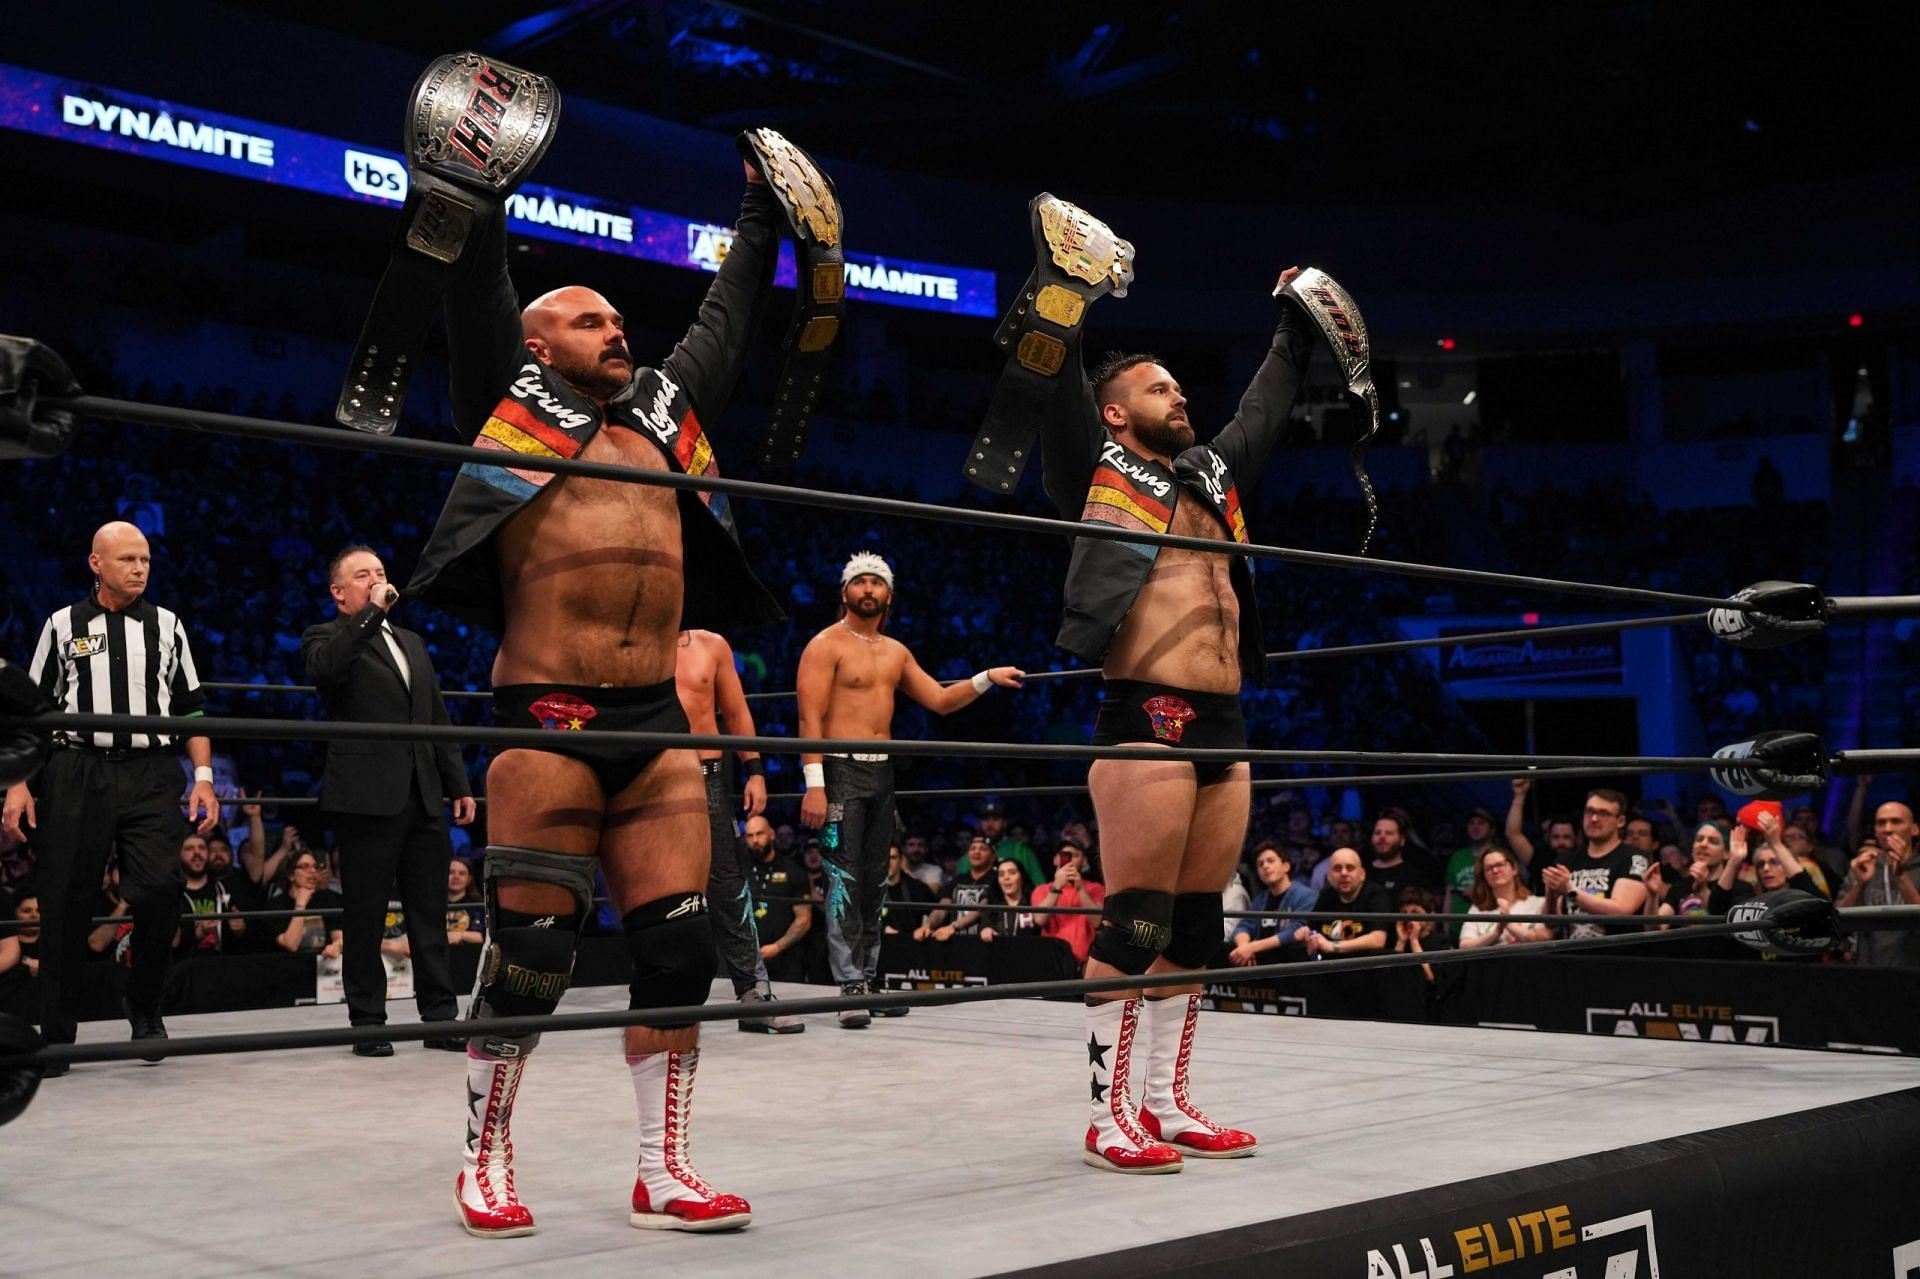 FTR are arguably having the best run as a tag team right now